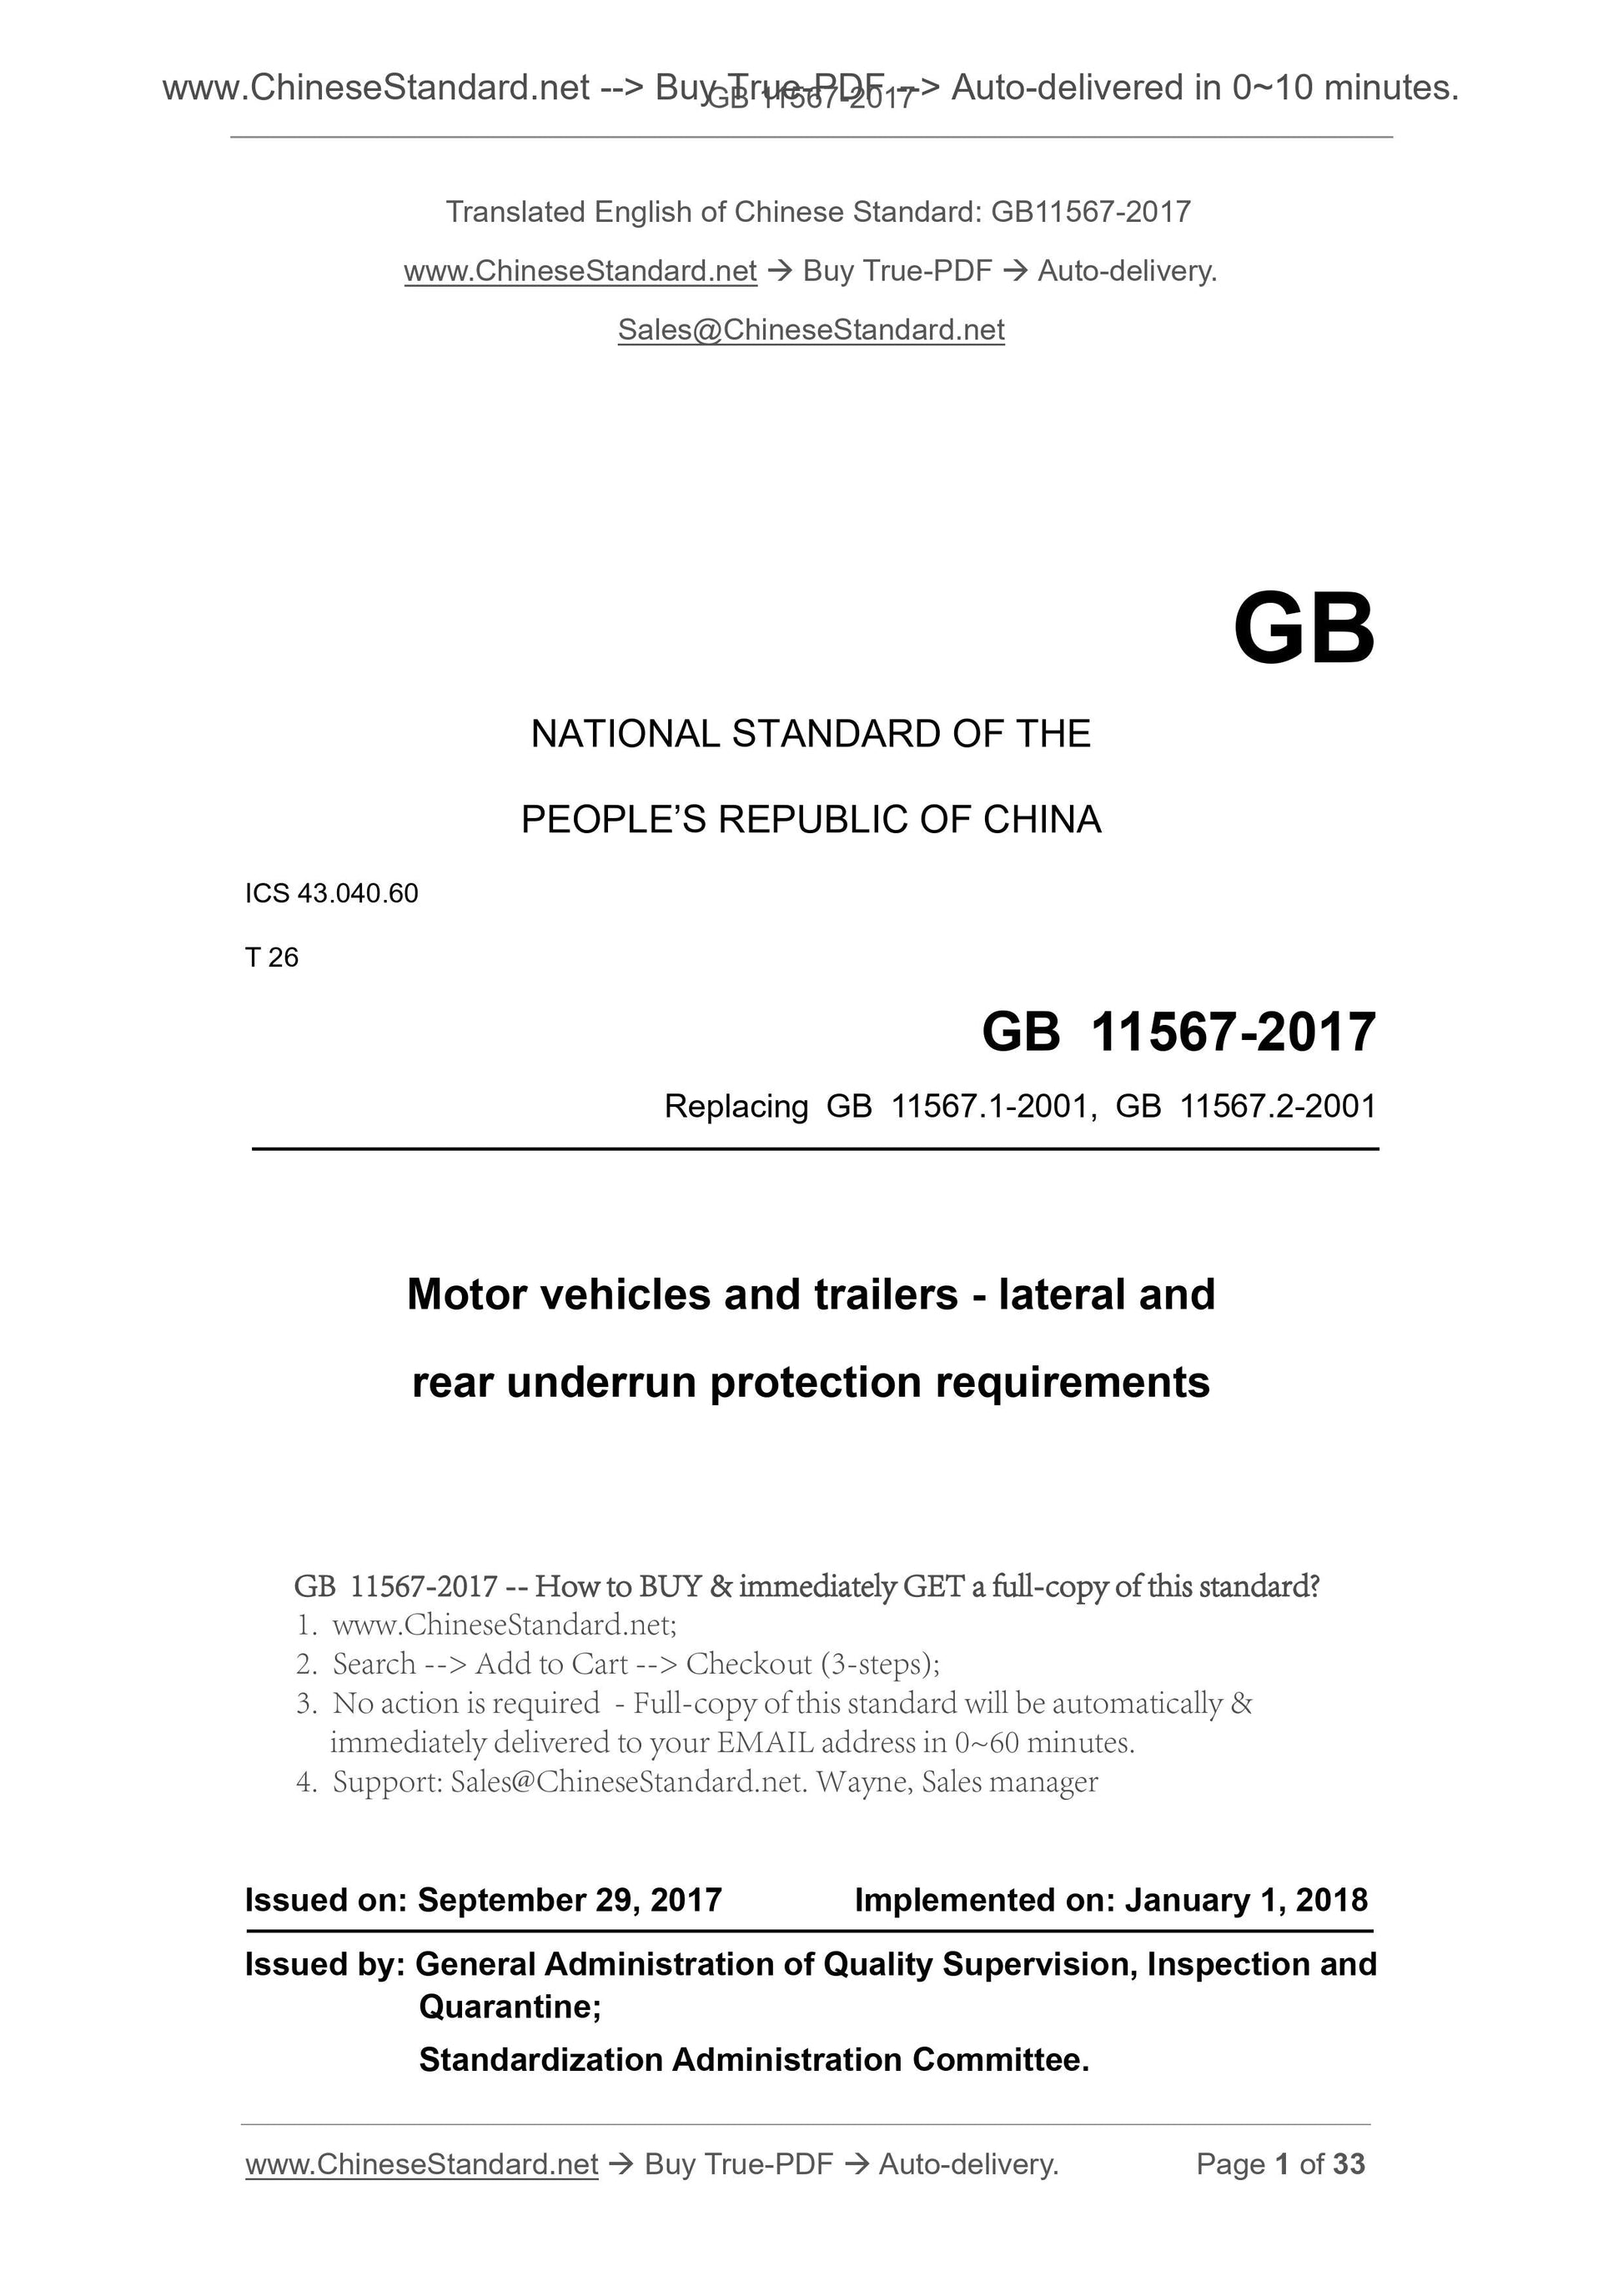 GB 11567-2017 Page 1